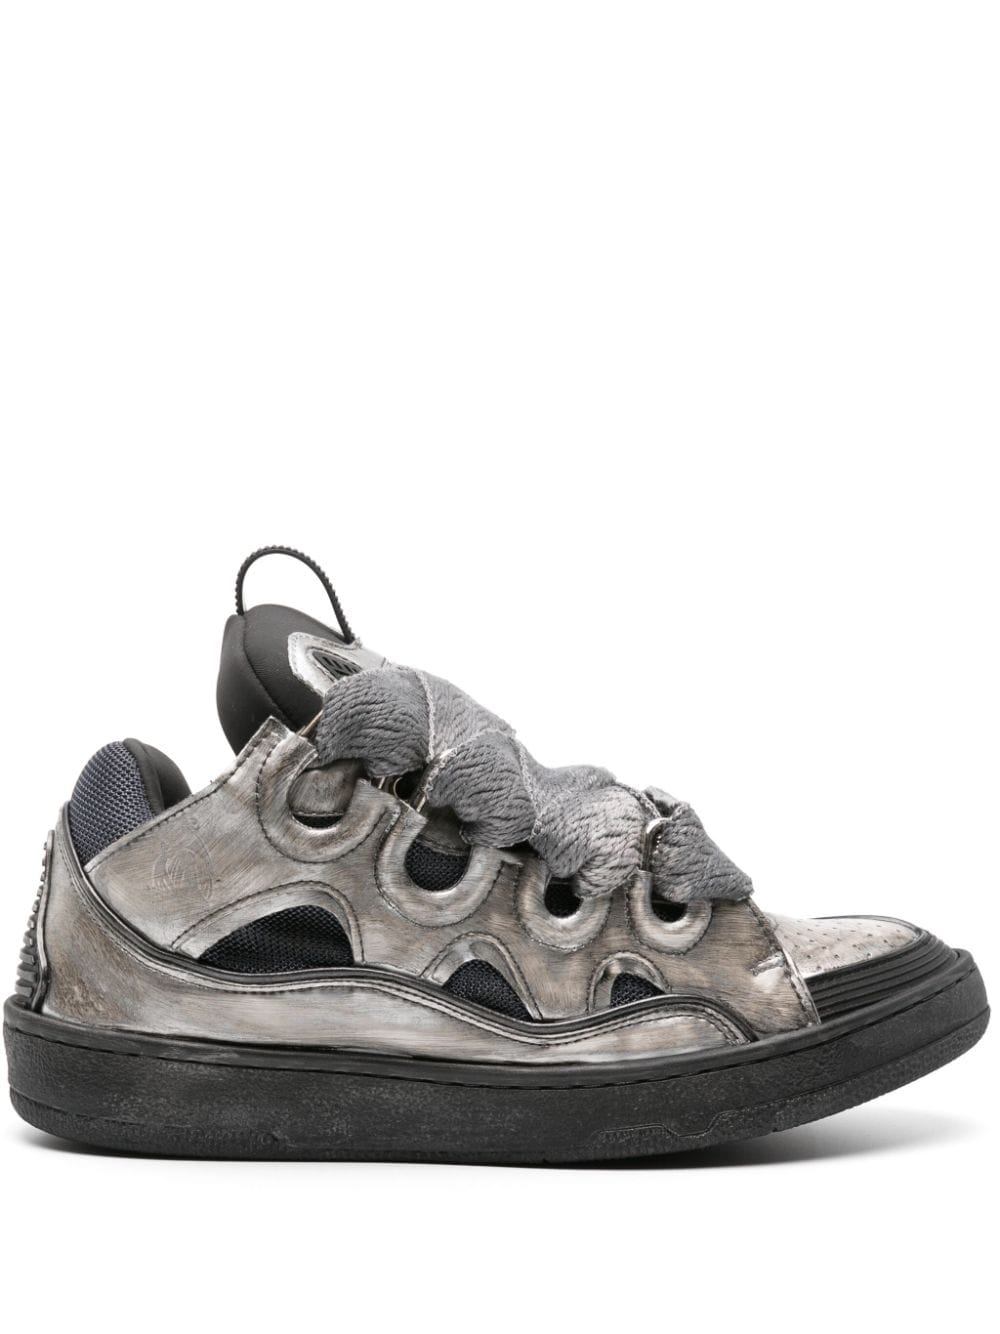 Image 1 of Lanvin Curb chunky leather sneakers